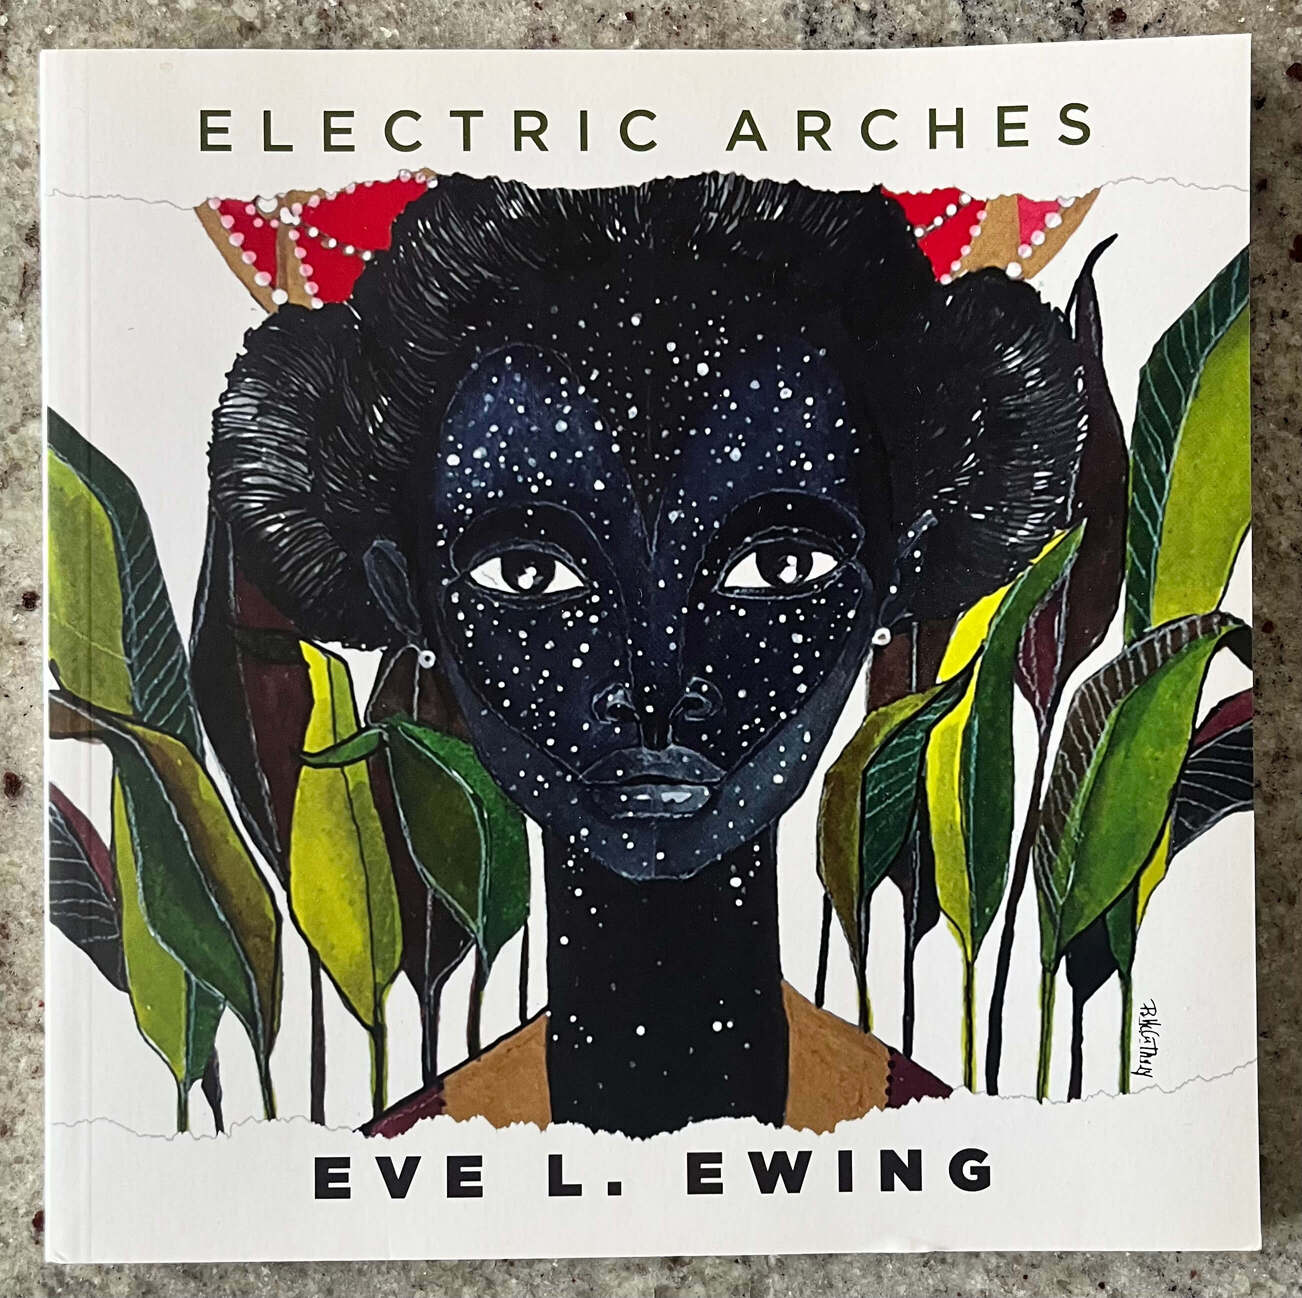 “Electric Arches” by Eve L. Ewing.